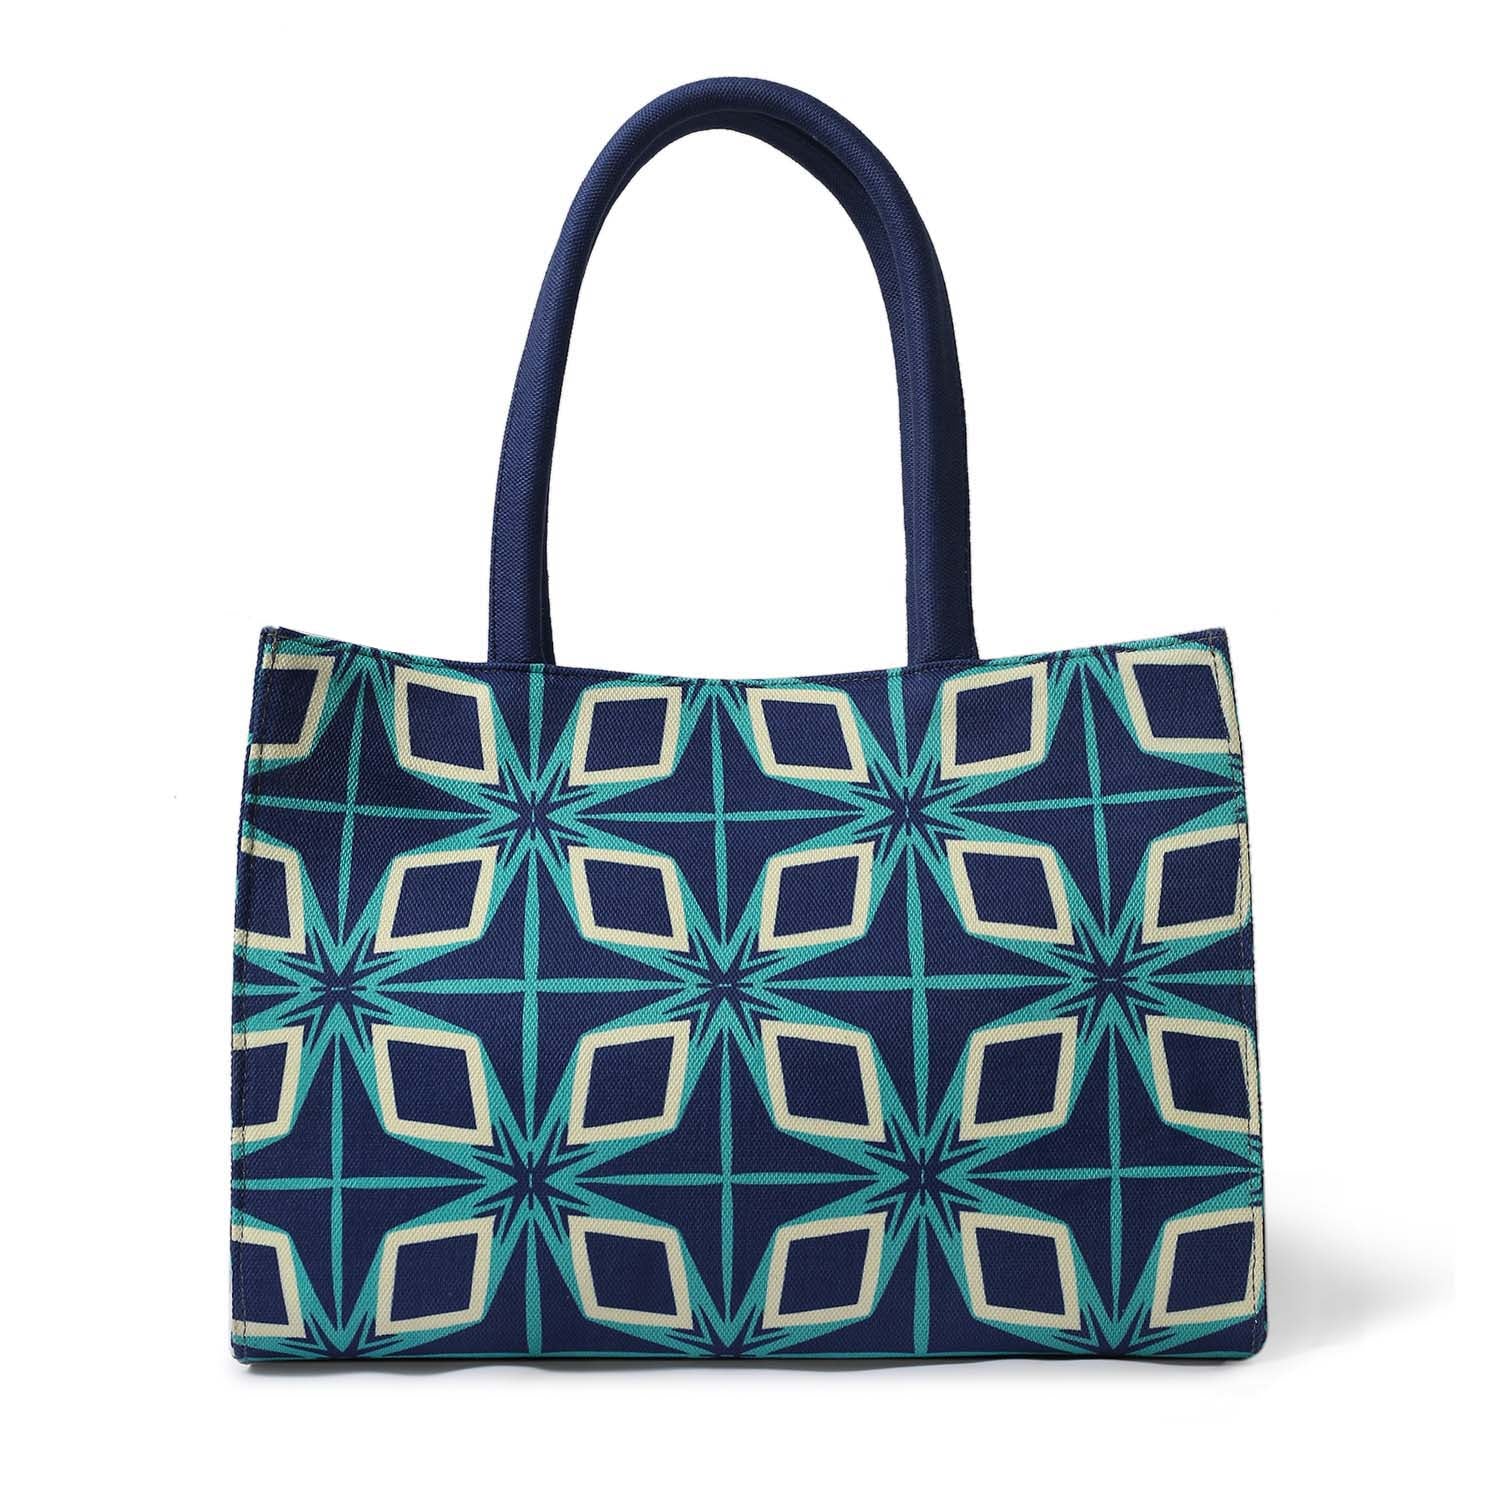 Fashionable tote bag featuring blue and green design with book and sunglasses.